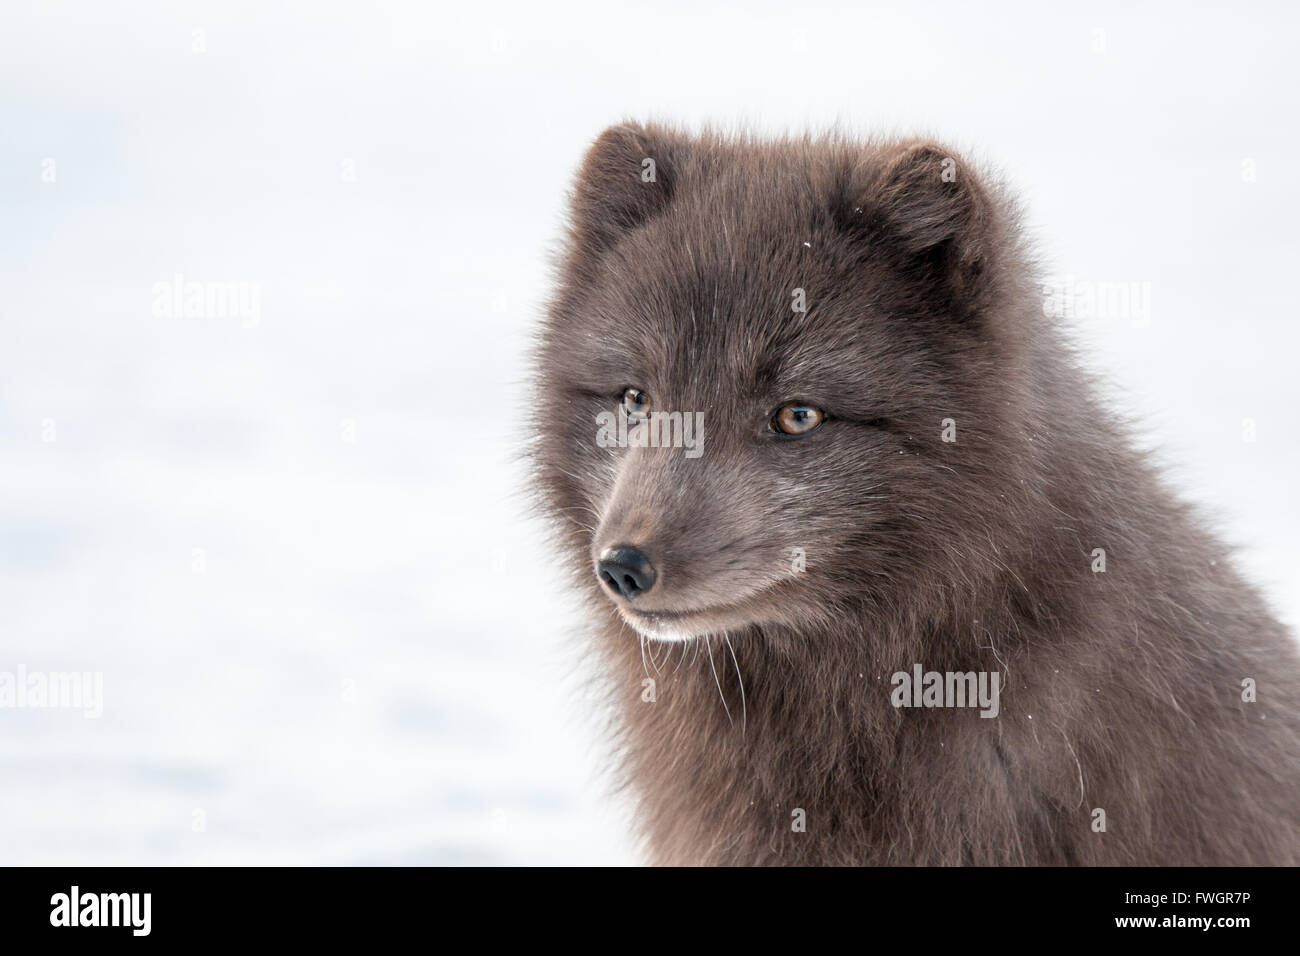 Close up head shot of brown arctic fox (alopex lagopus) surrounded by snow Stock Photo